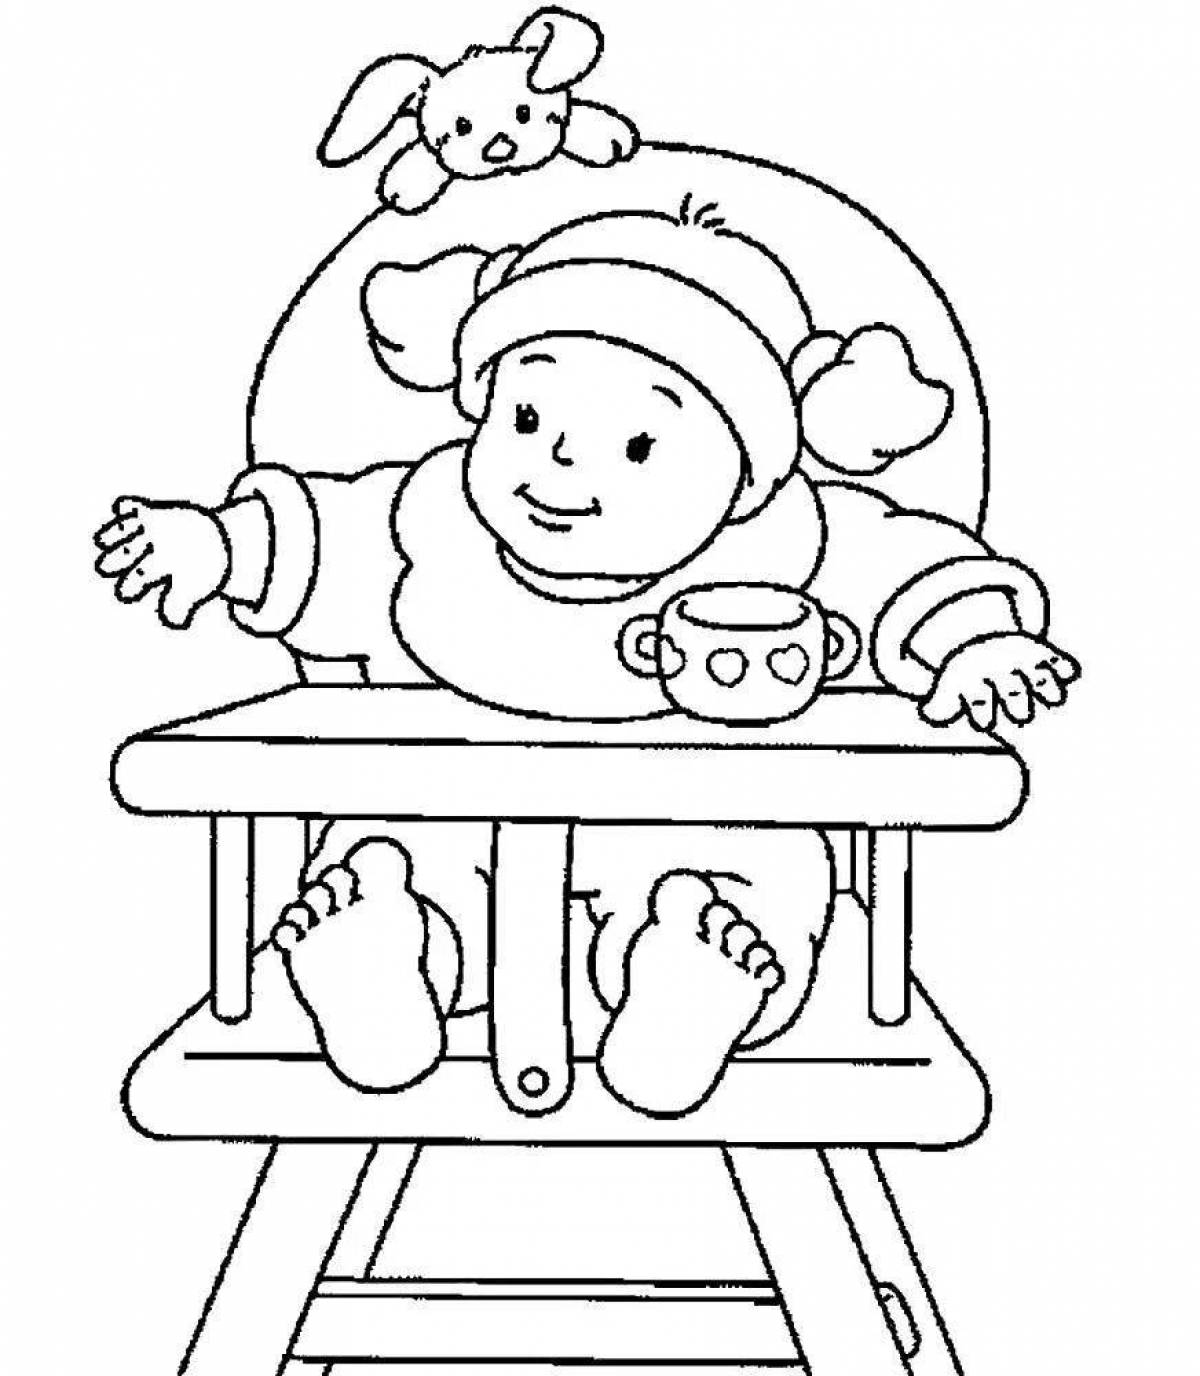 Coloring page magic dolly